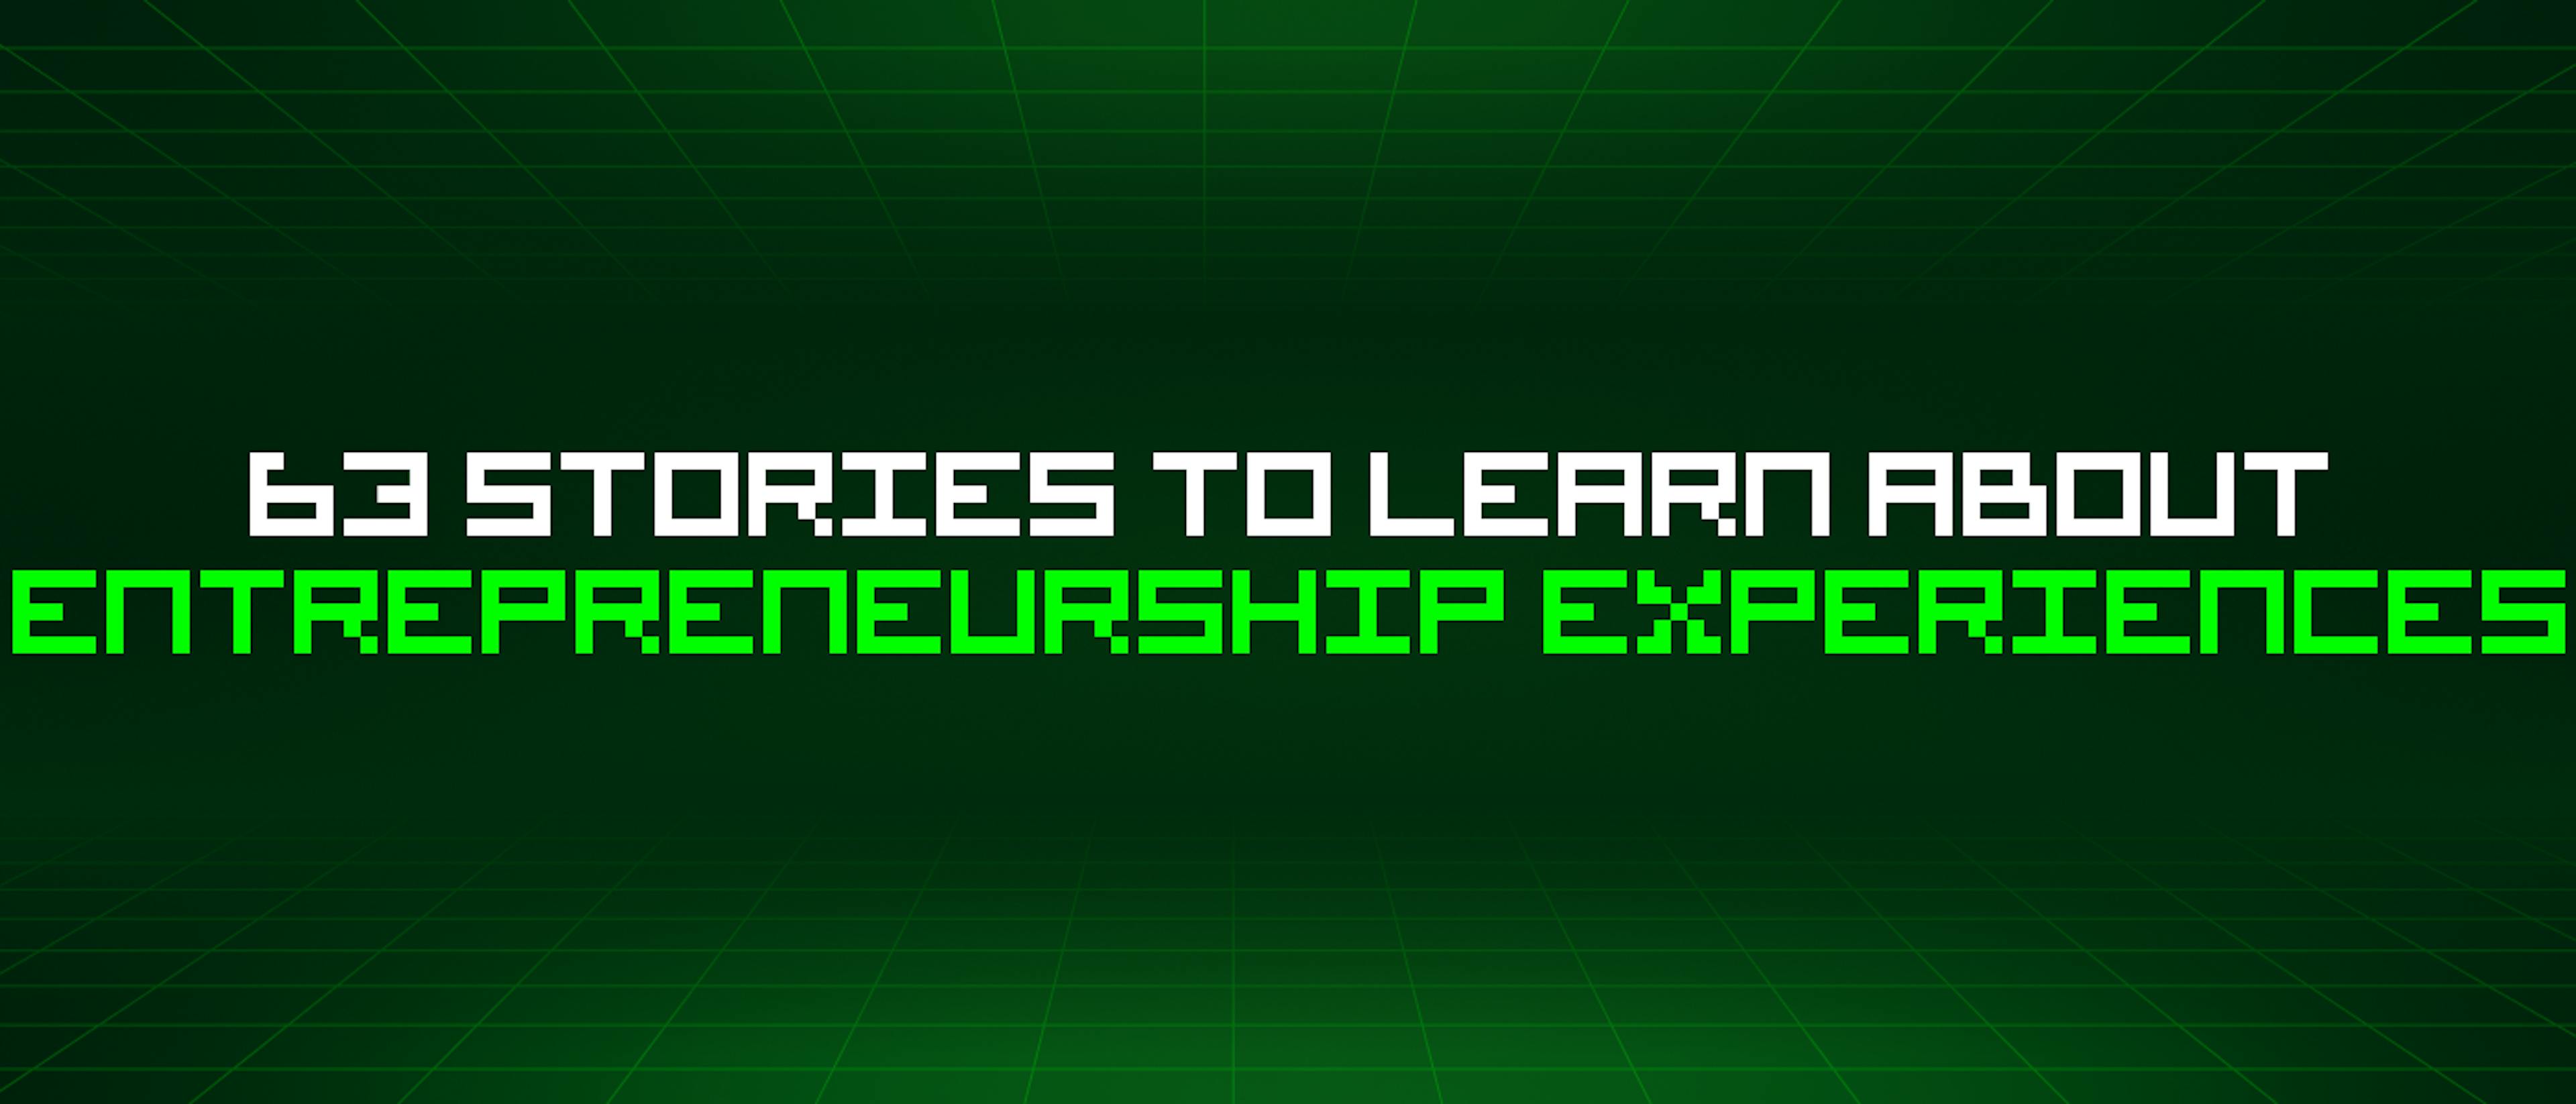 featured image - 63 Stories To Learn About Entrepreneurship Experiences